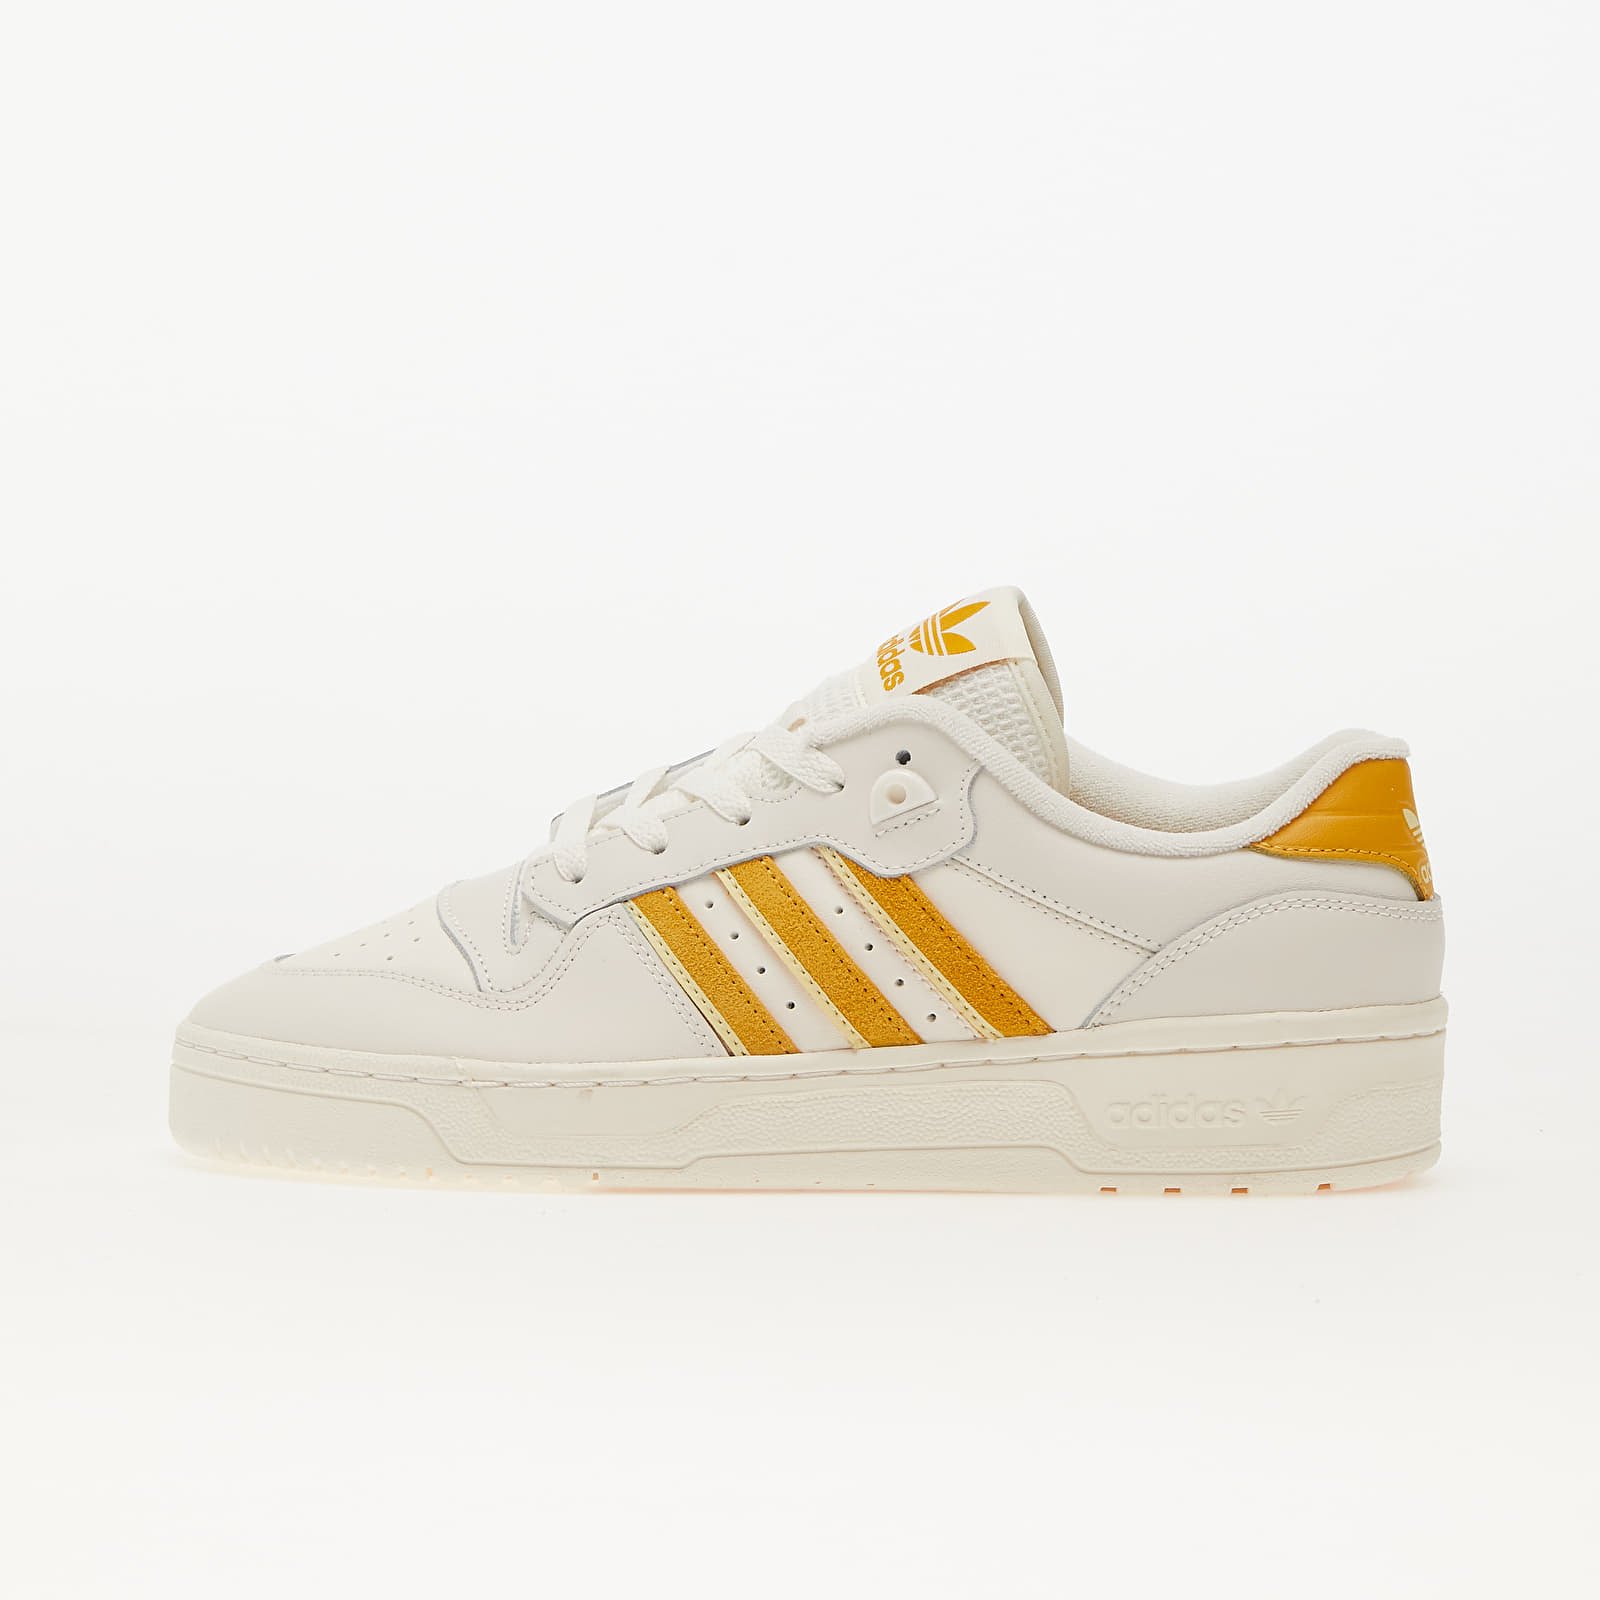 Chaussures et baskets homme adidas Rivalry Low Cloud White/ Preloved Yellow/ Easy Yellow